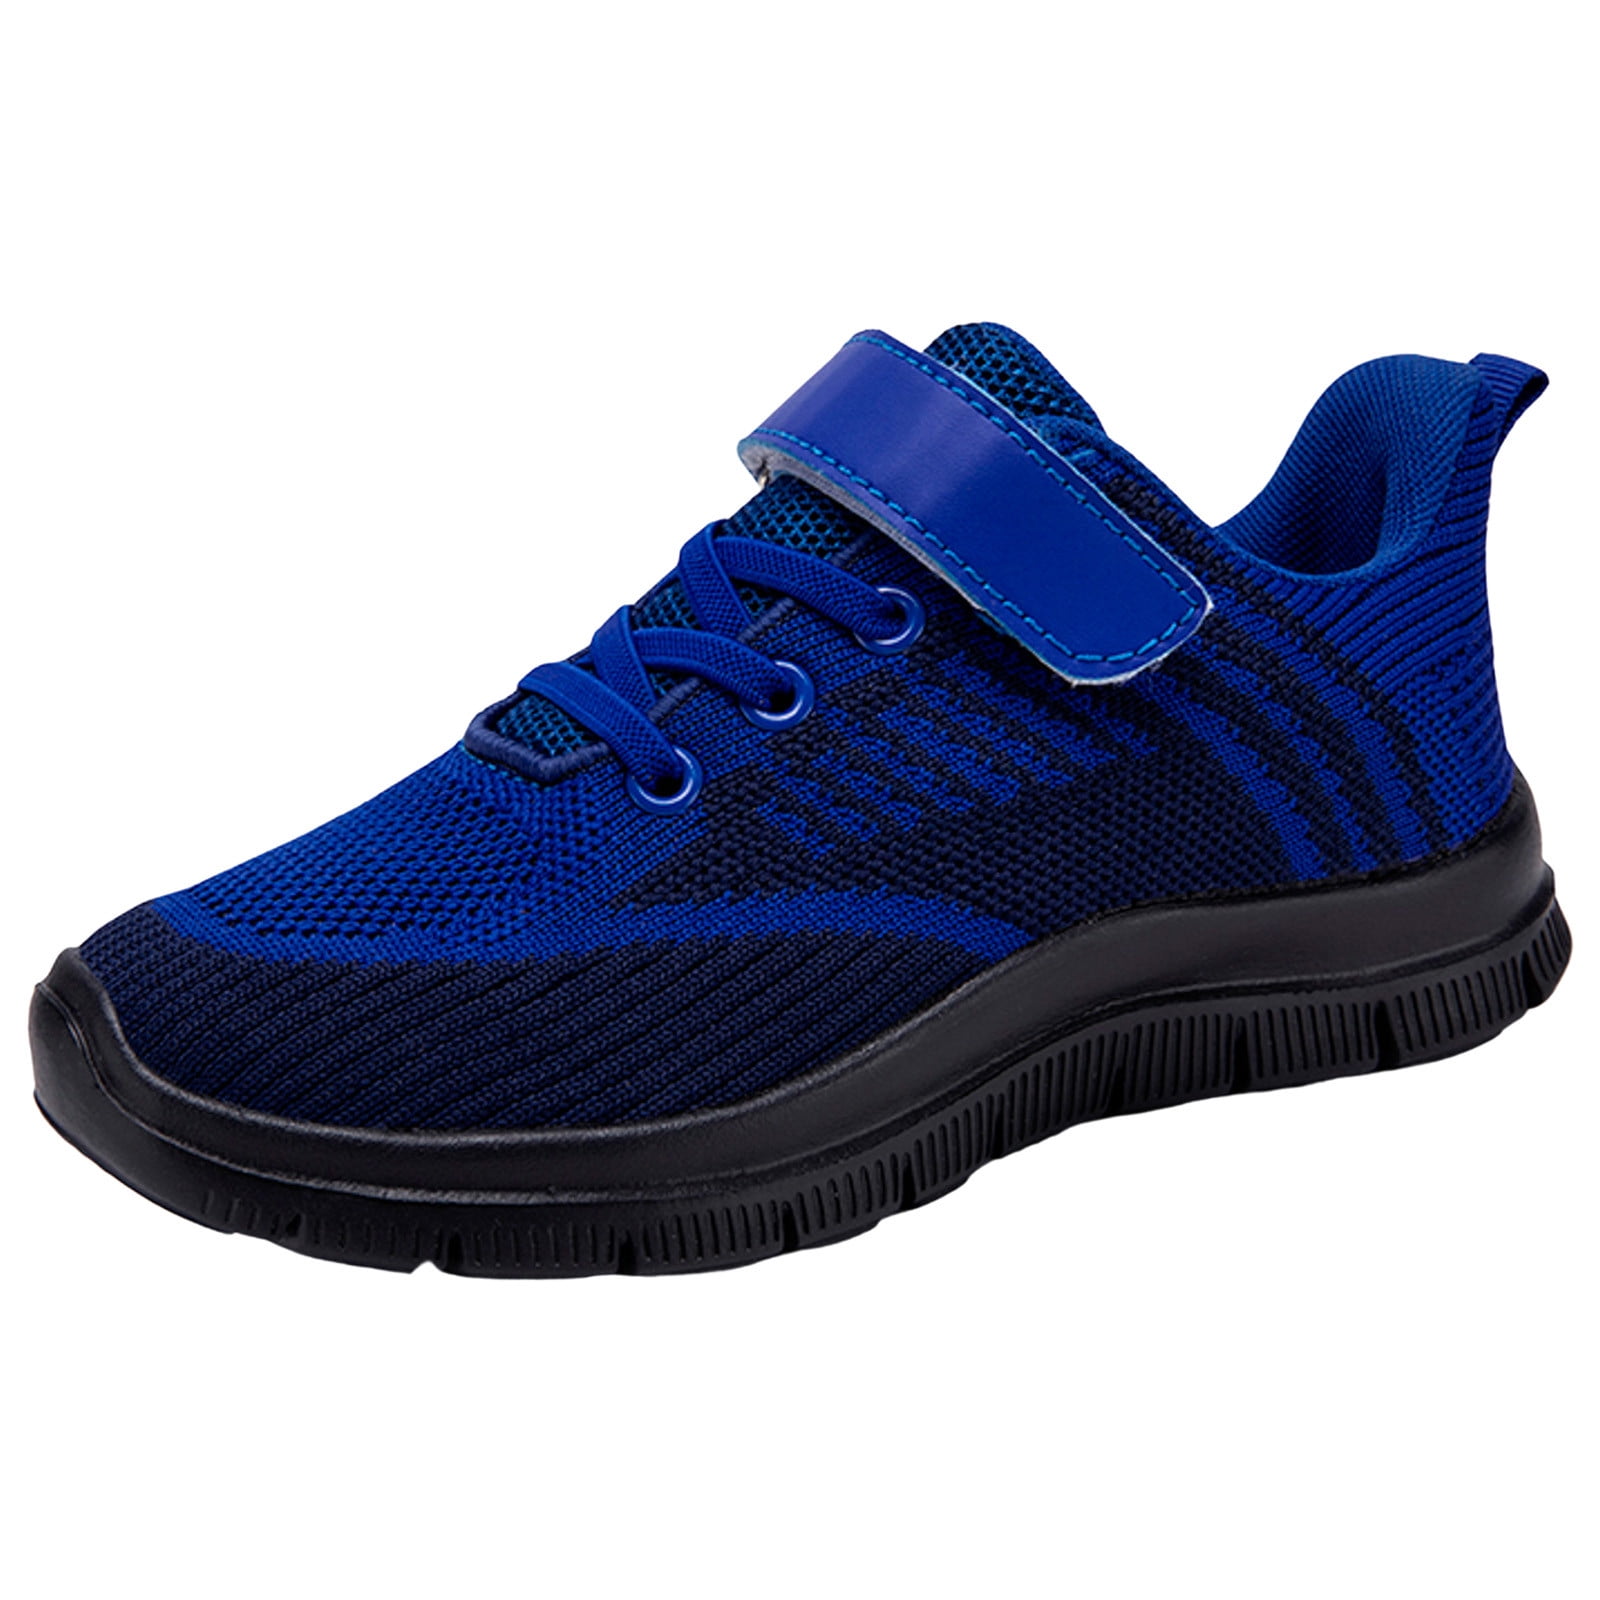 Women's Navy Blue Shoes for Healthcare Workers | Clove